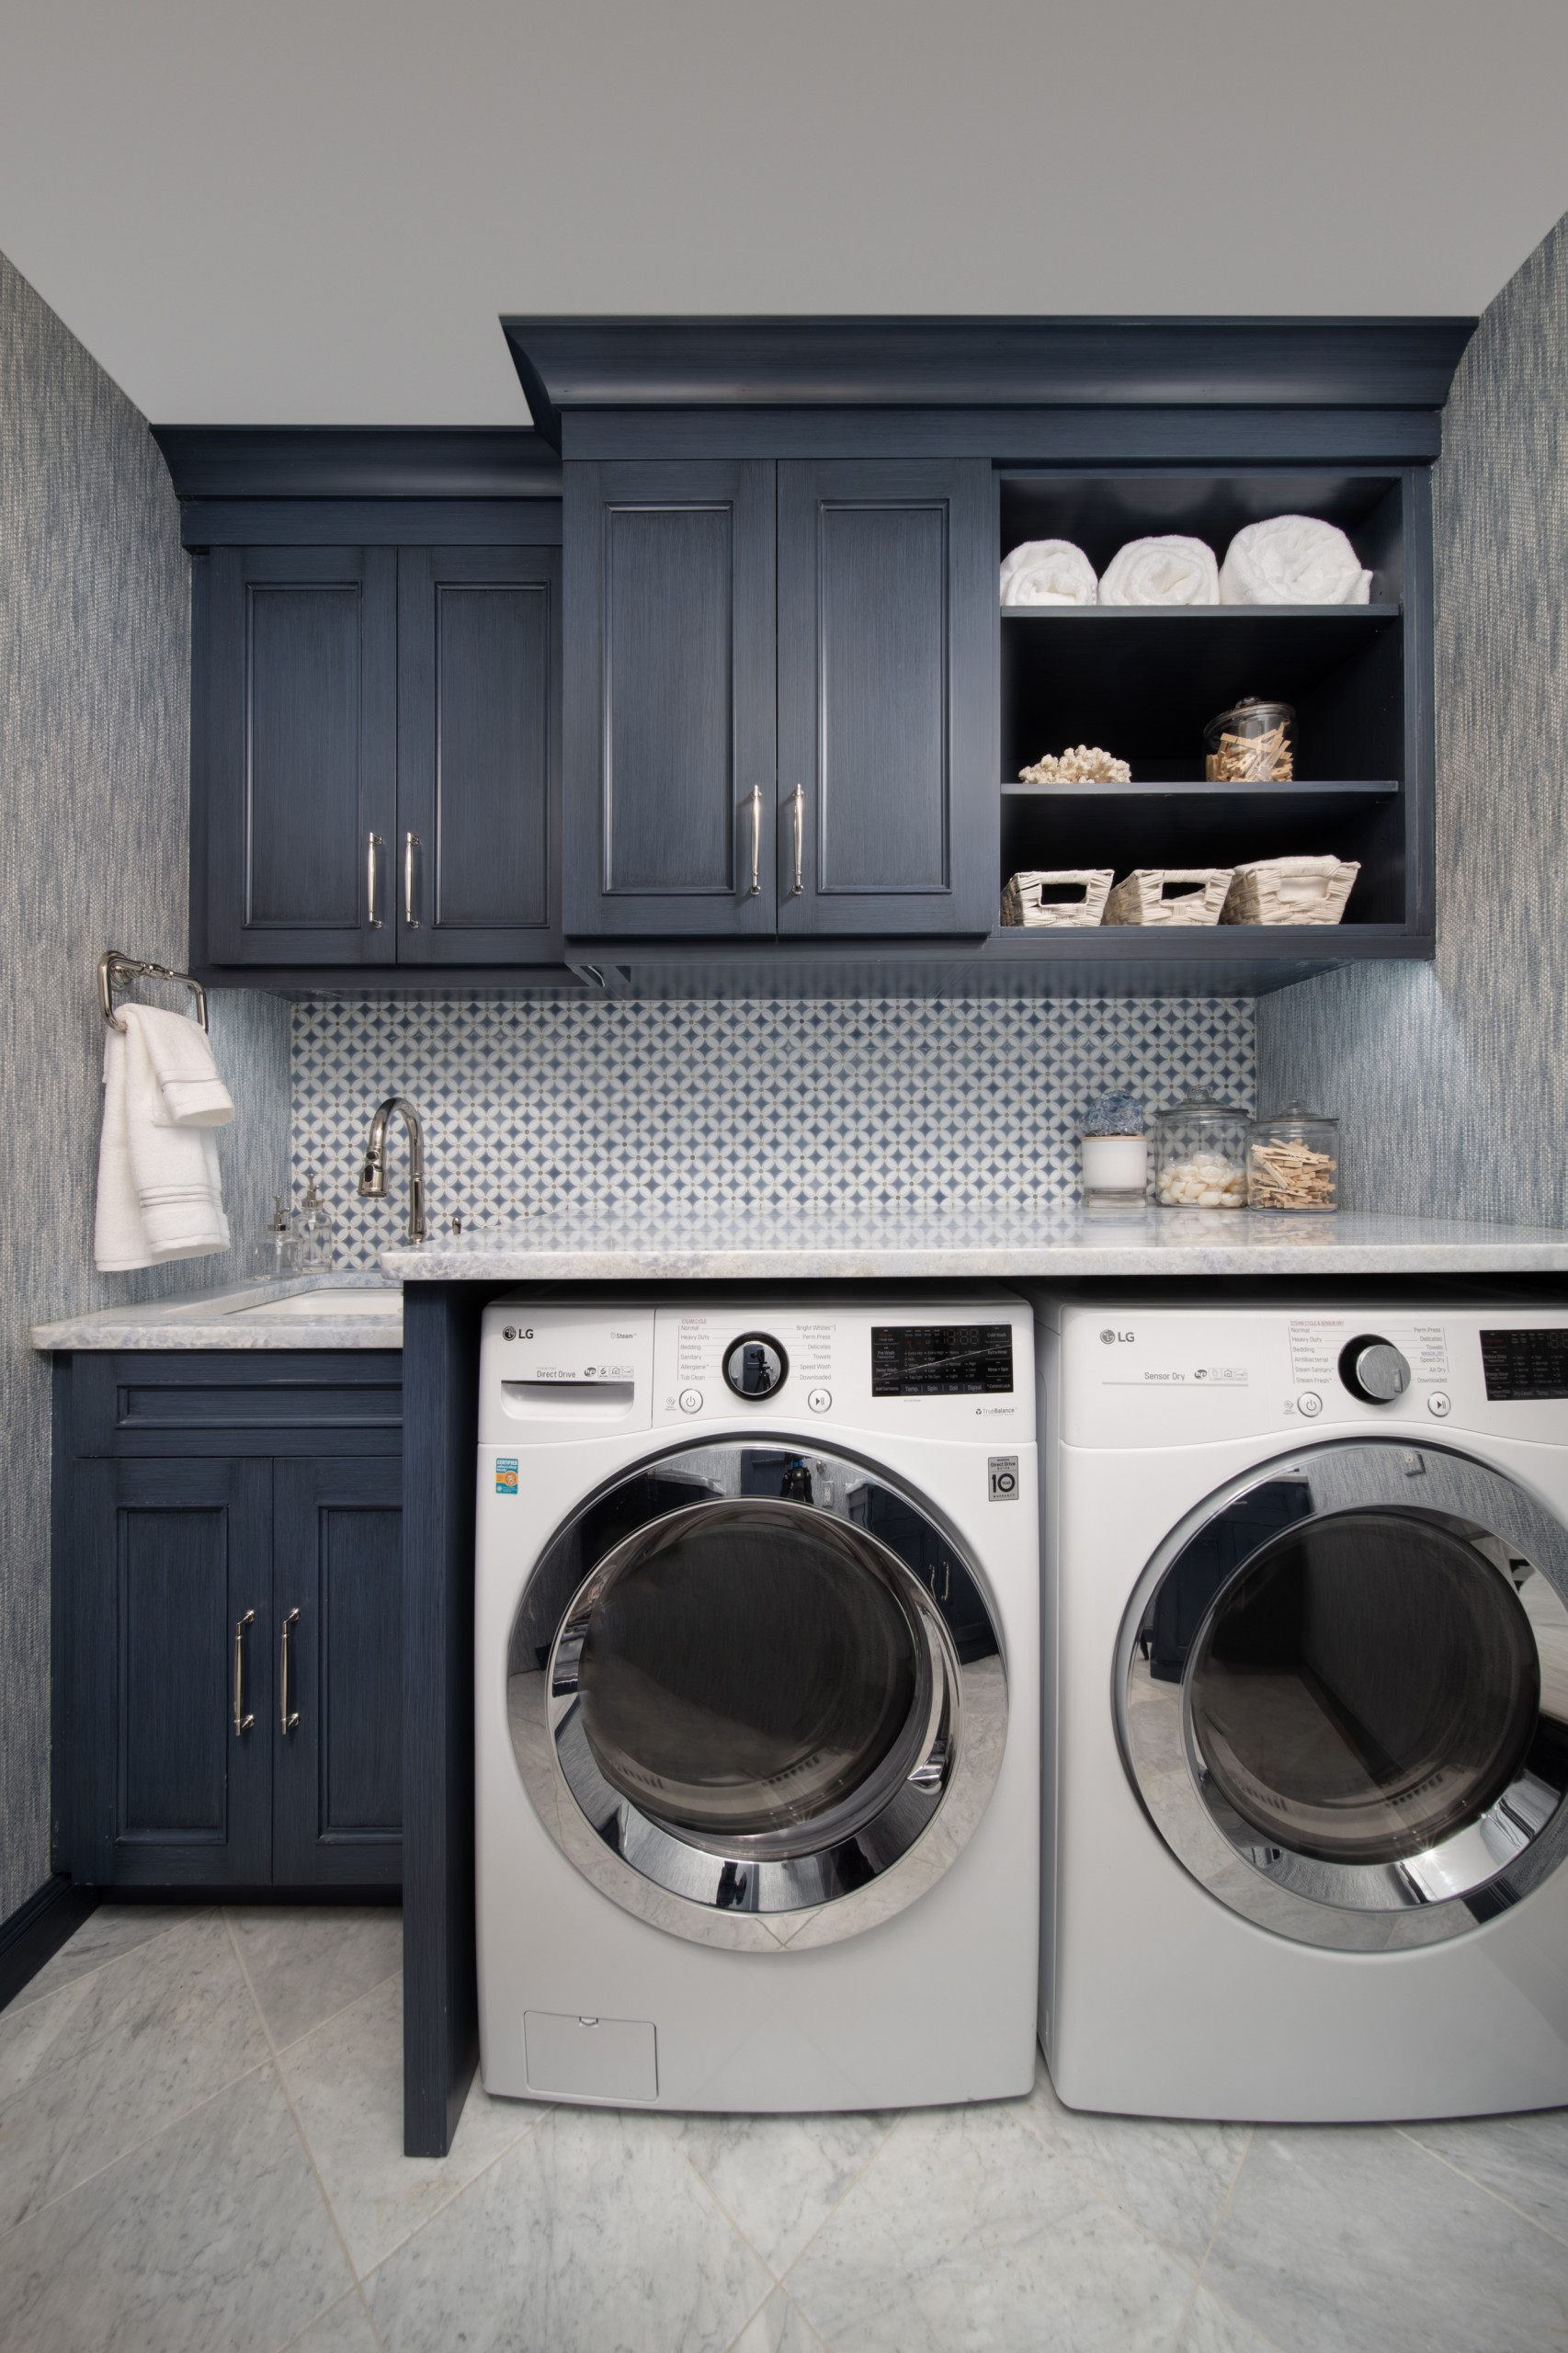 75 Wallpaper Laundry Room Ideas You'll Love - March, 2023 | Houzz